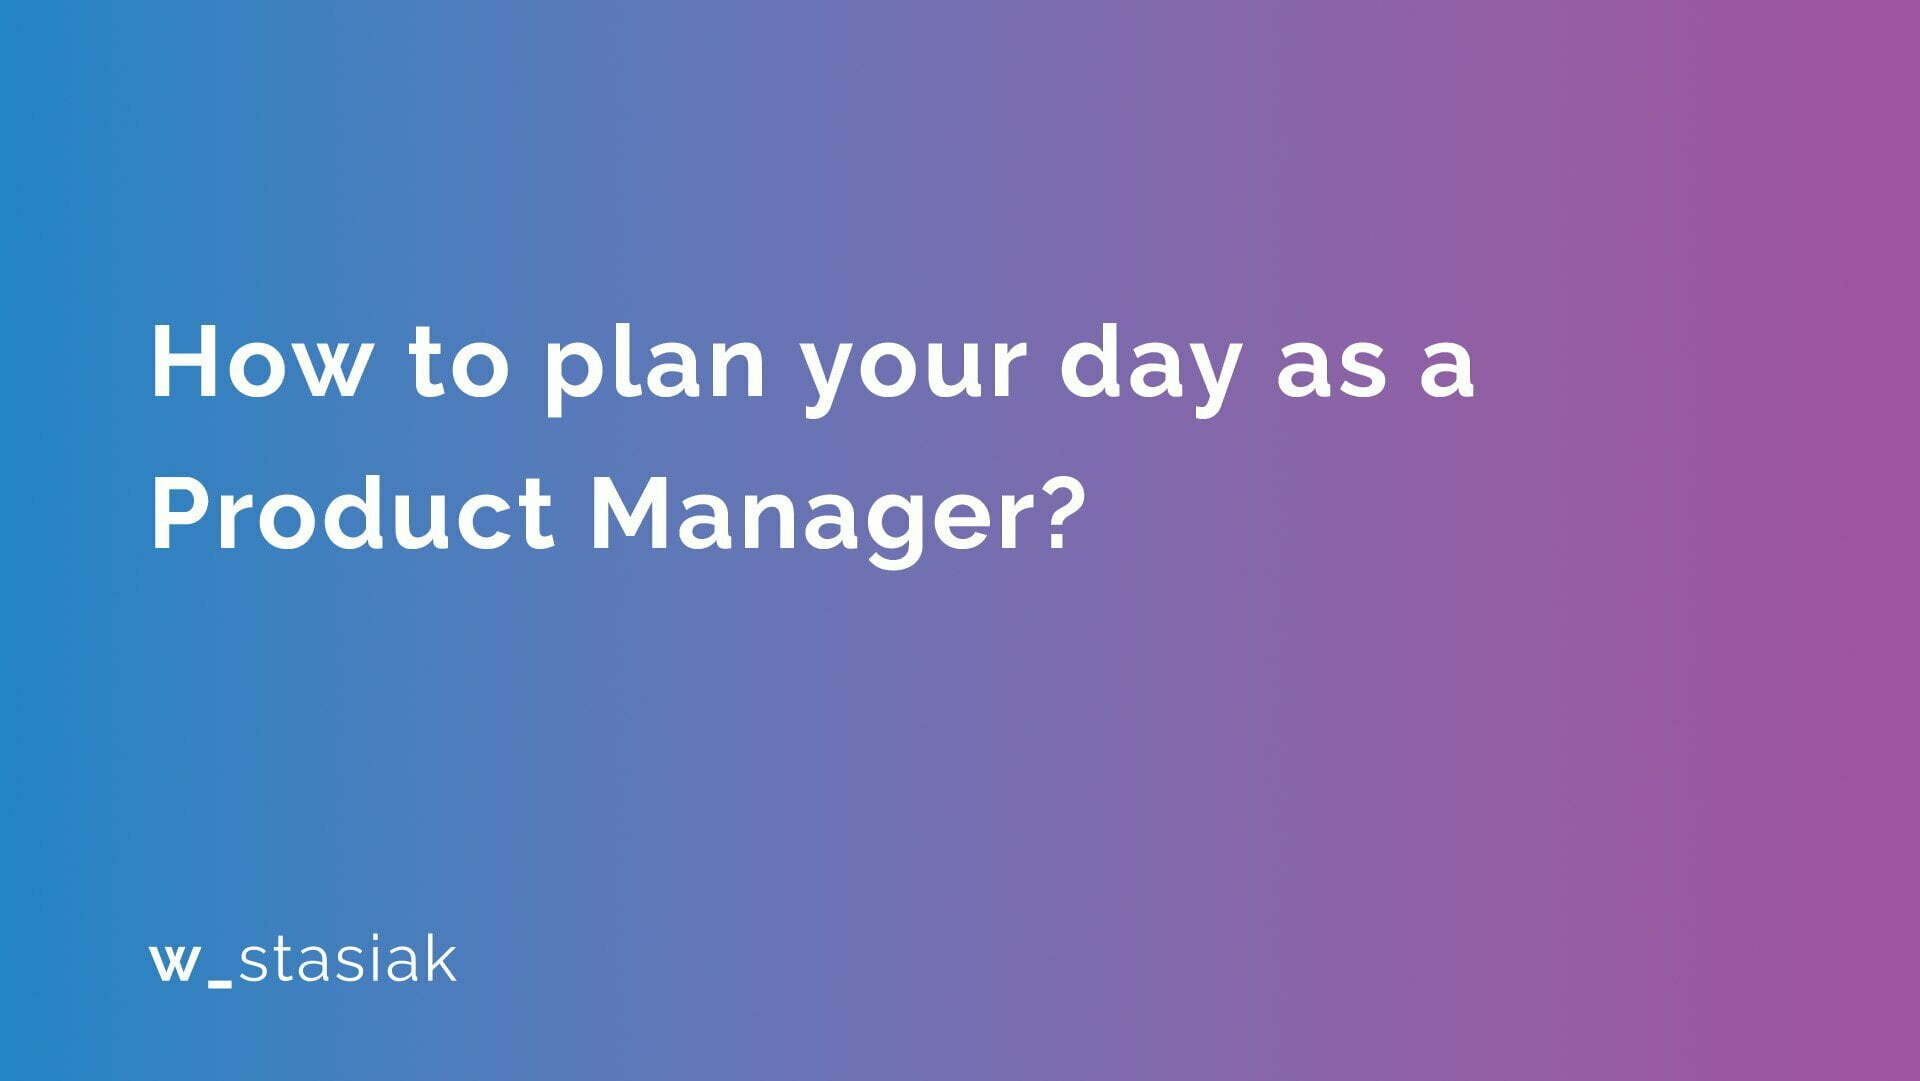 How to plan your day as a Product Manager - ws